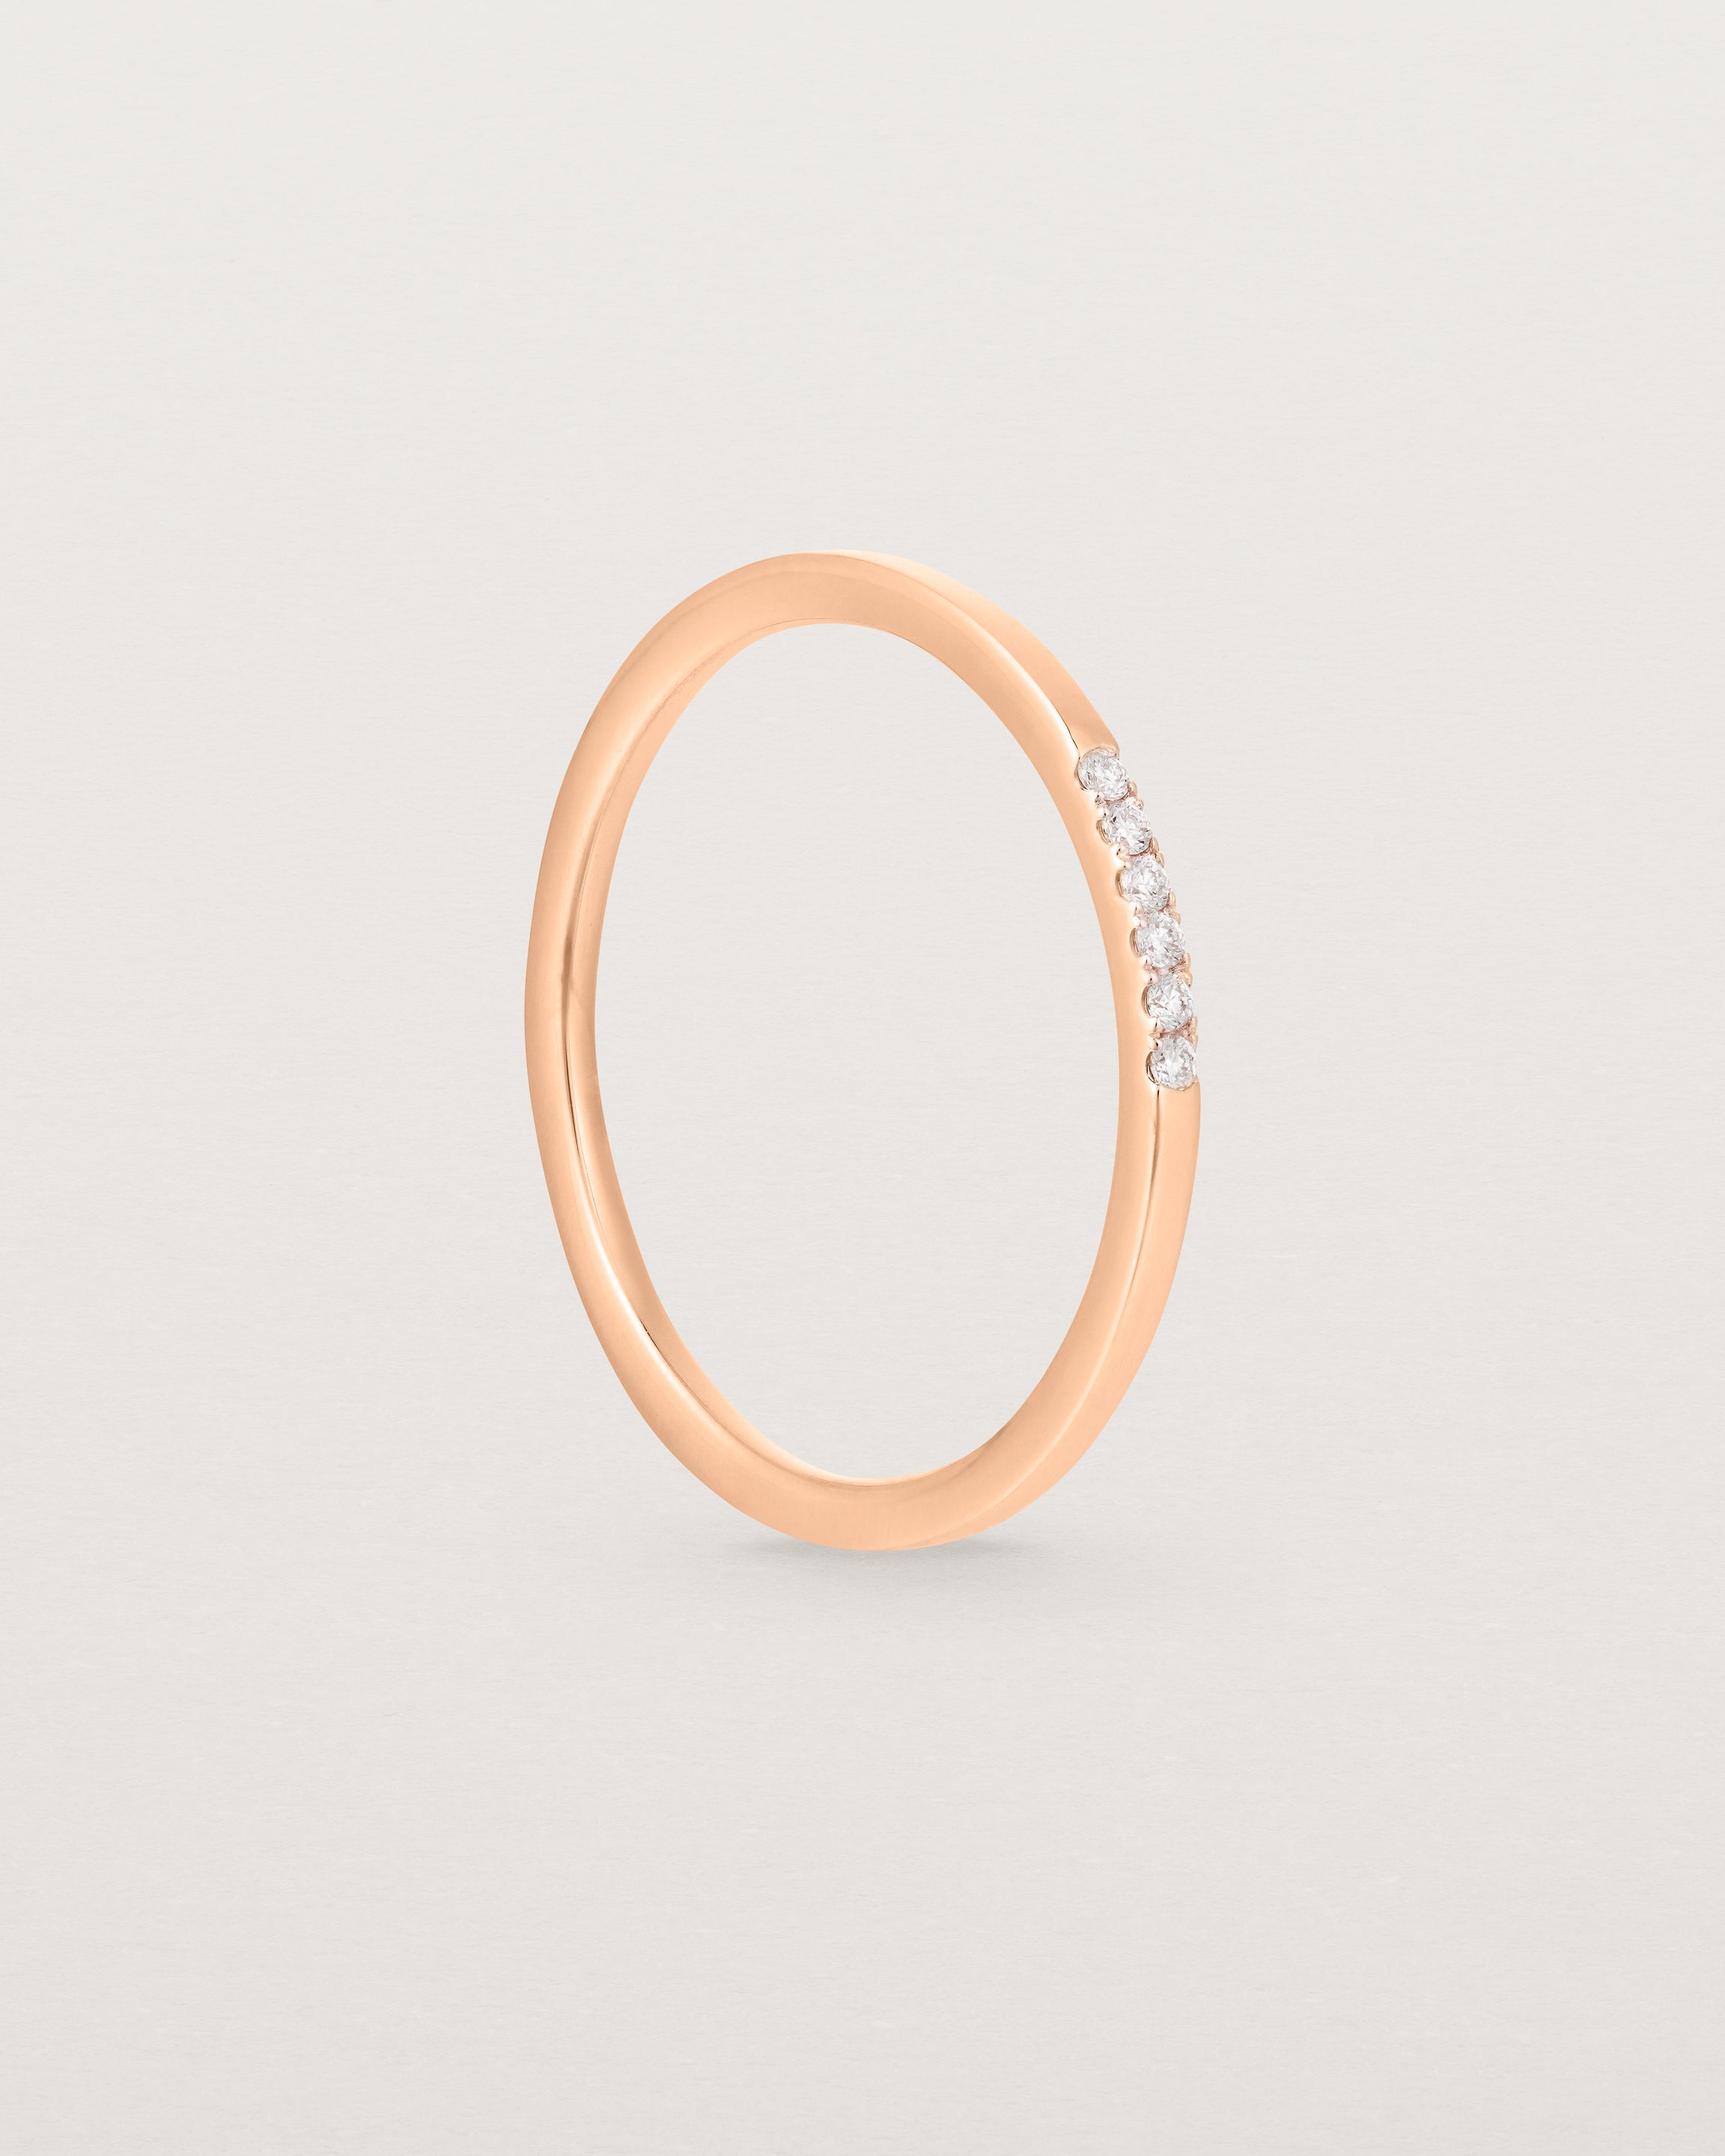 Standing view of the Six Stone Queenie Ring | Diamonds in Rose Gold.